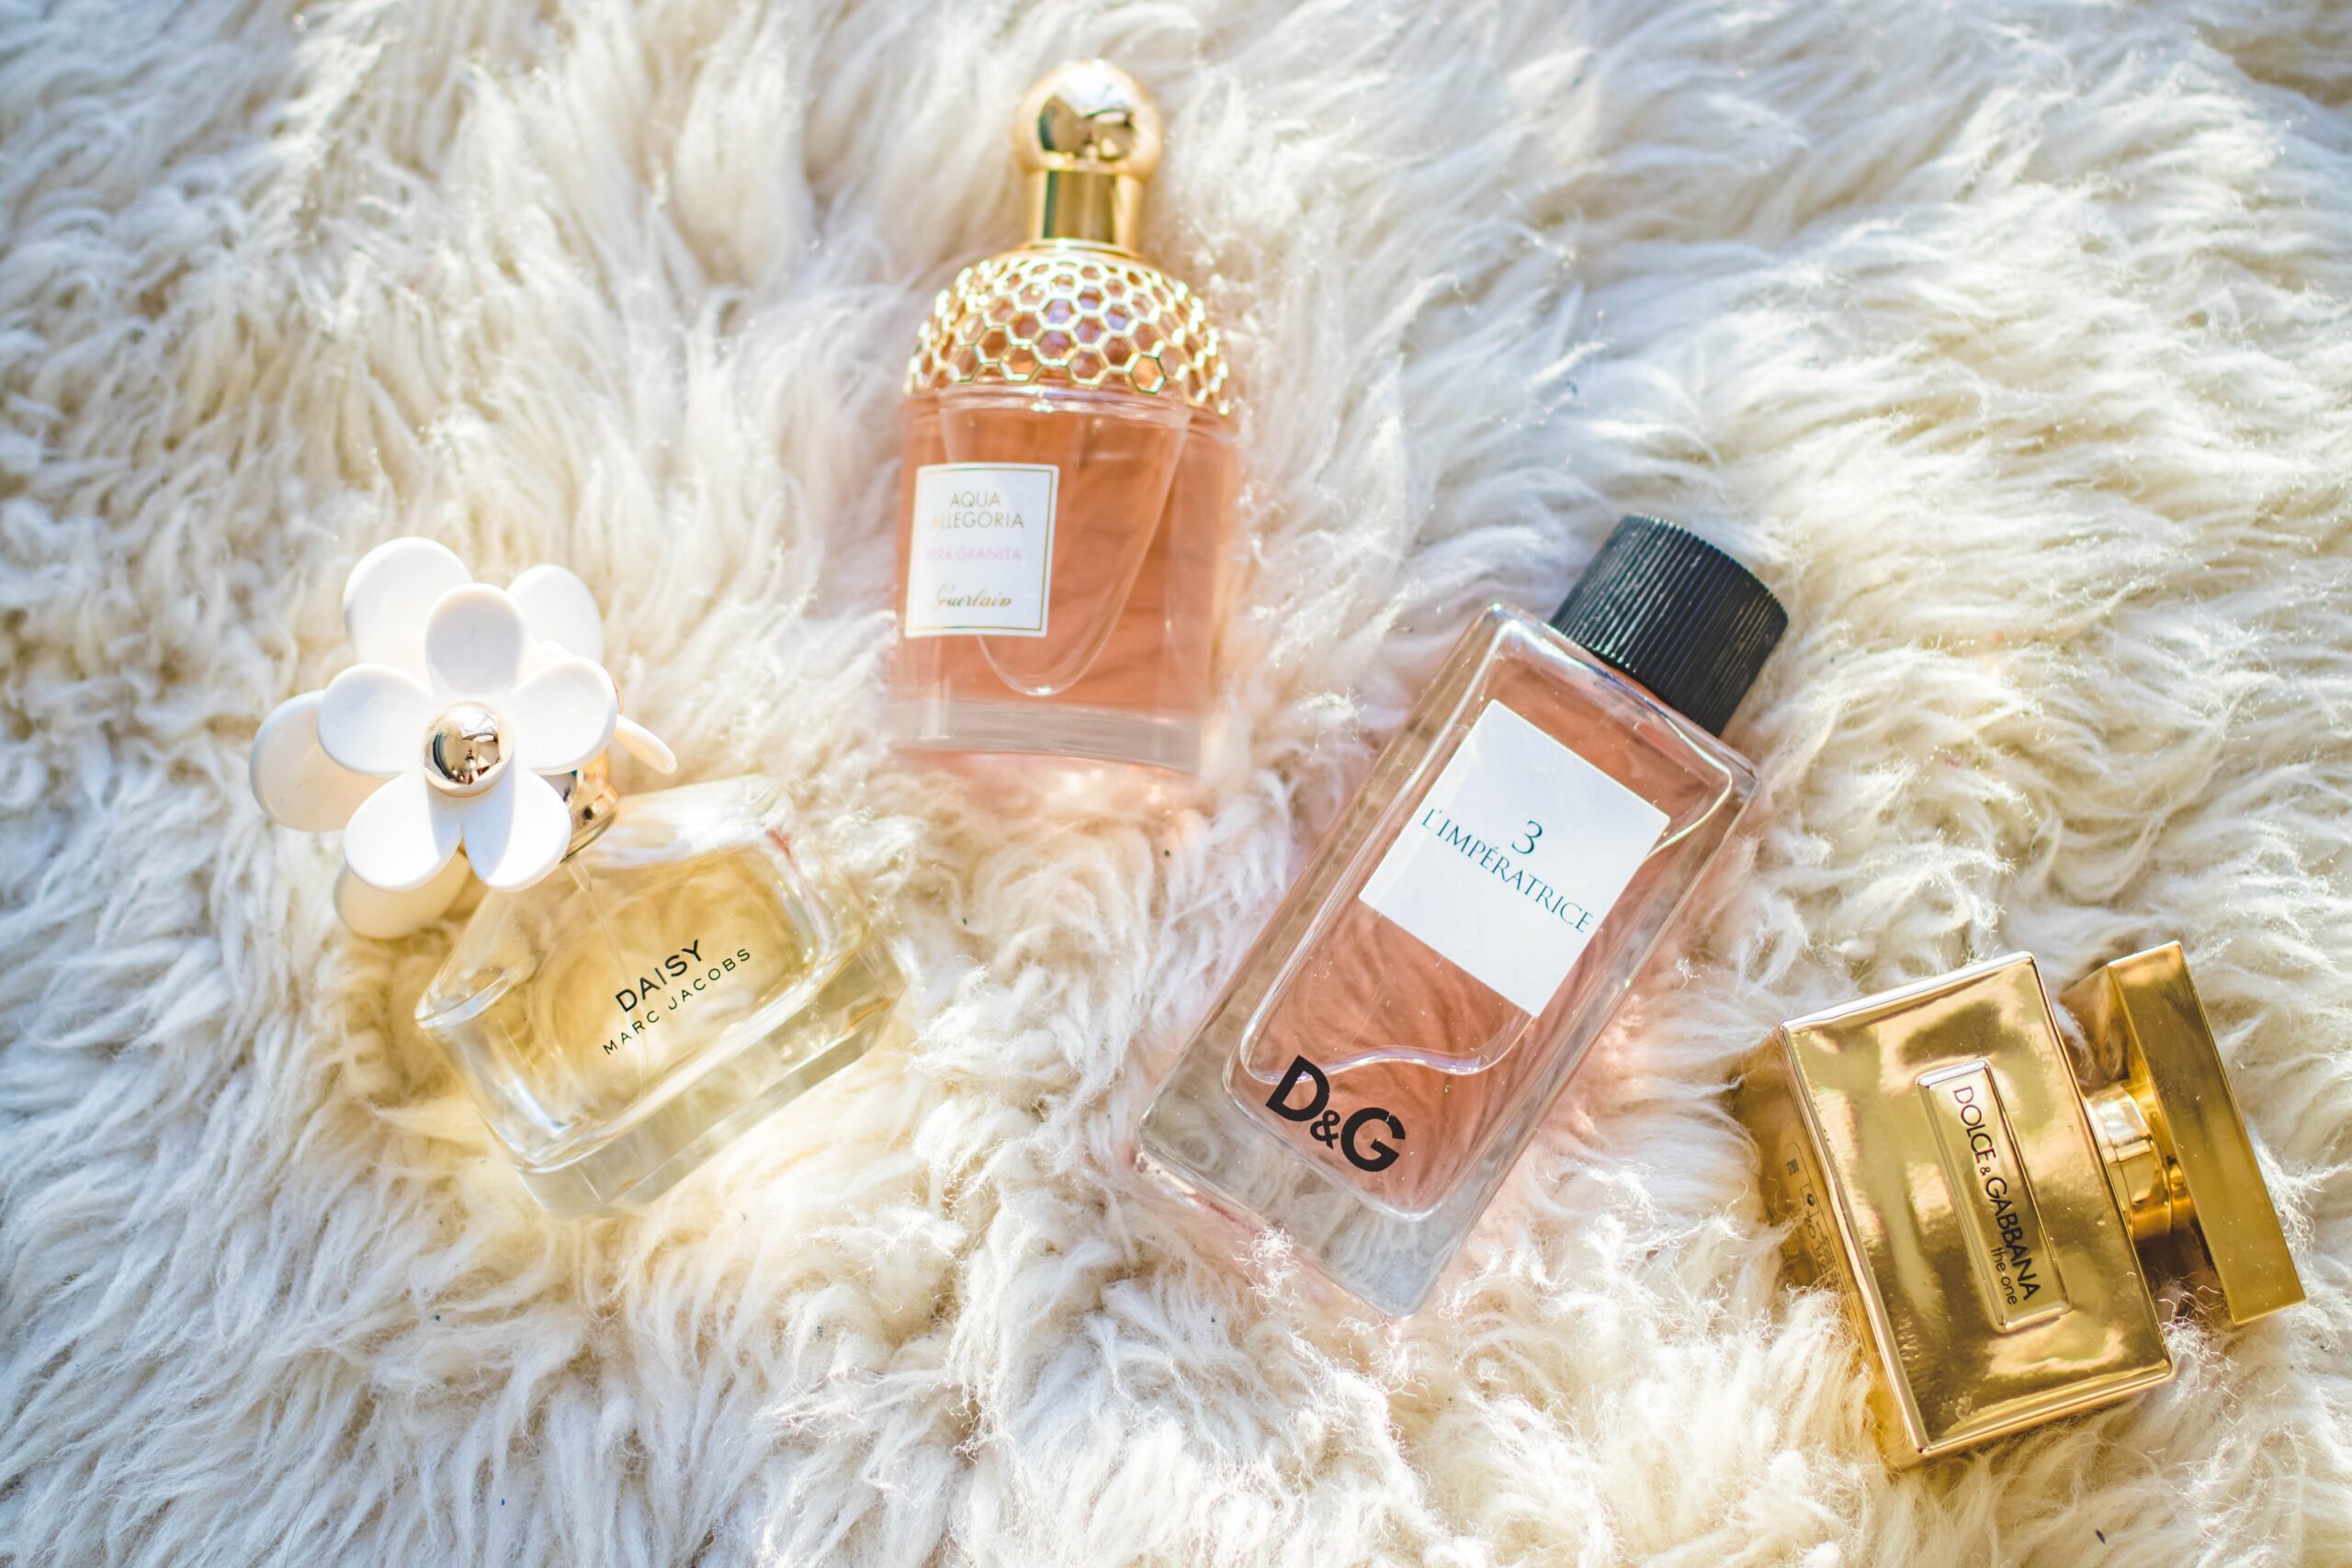 A variety of luxury perfumes lay on a fuzzy, white garment.